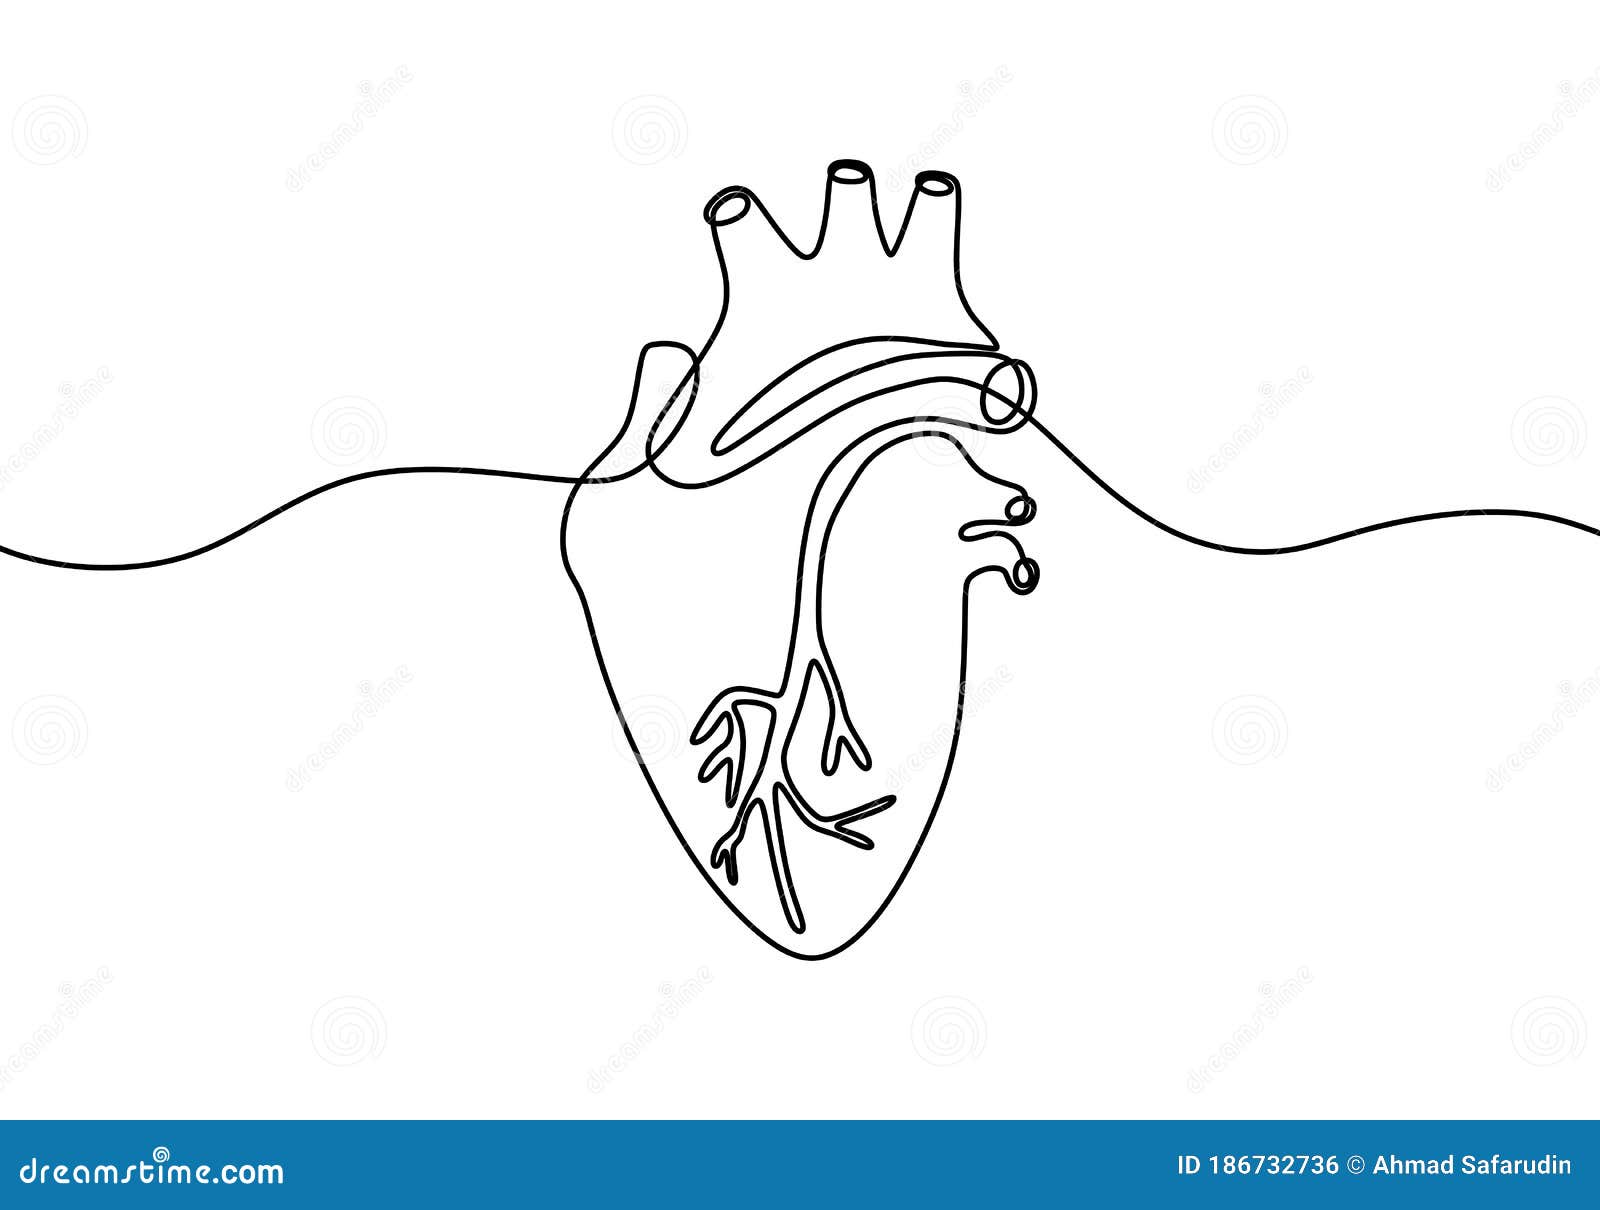 single continuous line art anatomical human heart silhouette.  heart on white background. healthy medicine concept 